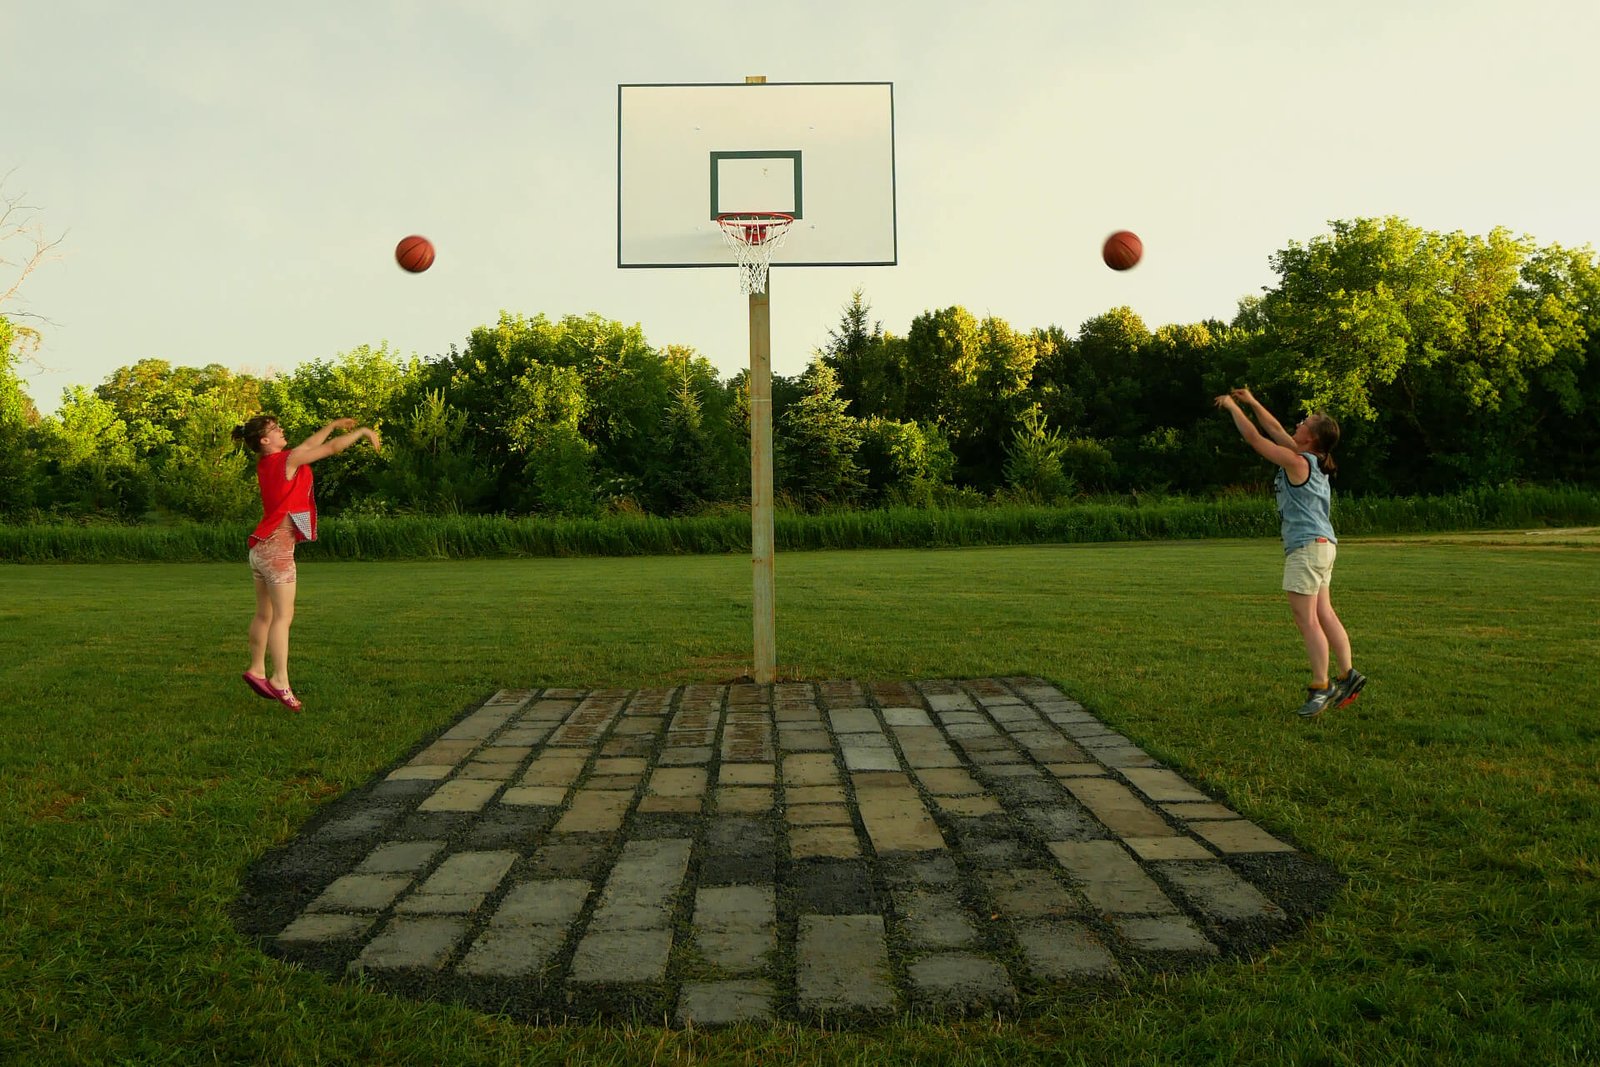 A person in blue and one in red each shoot a basketball at the dirtball hoop